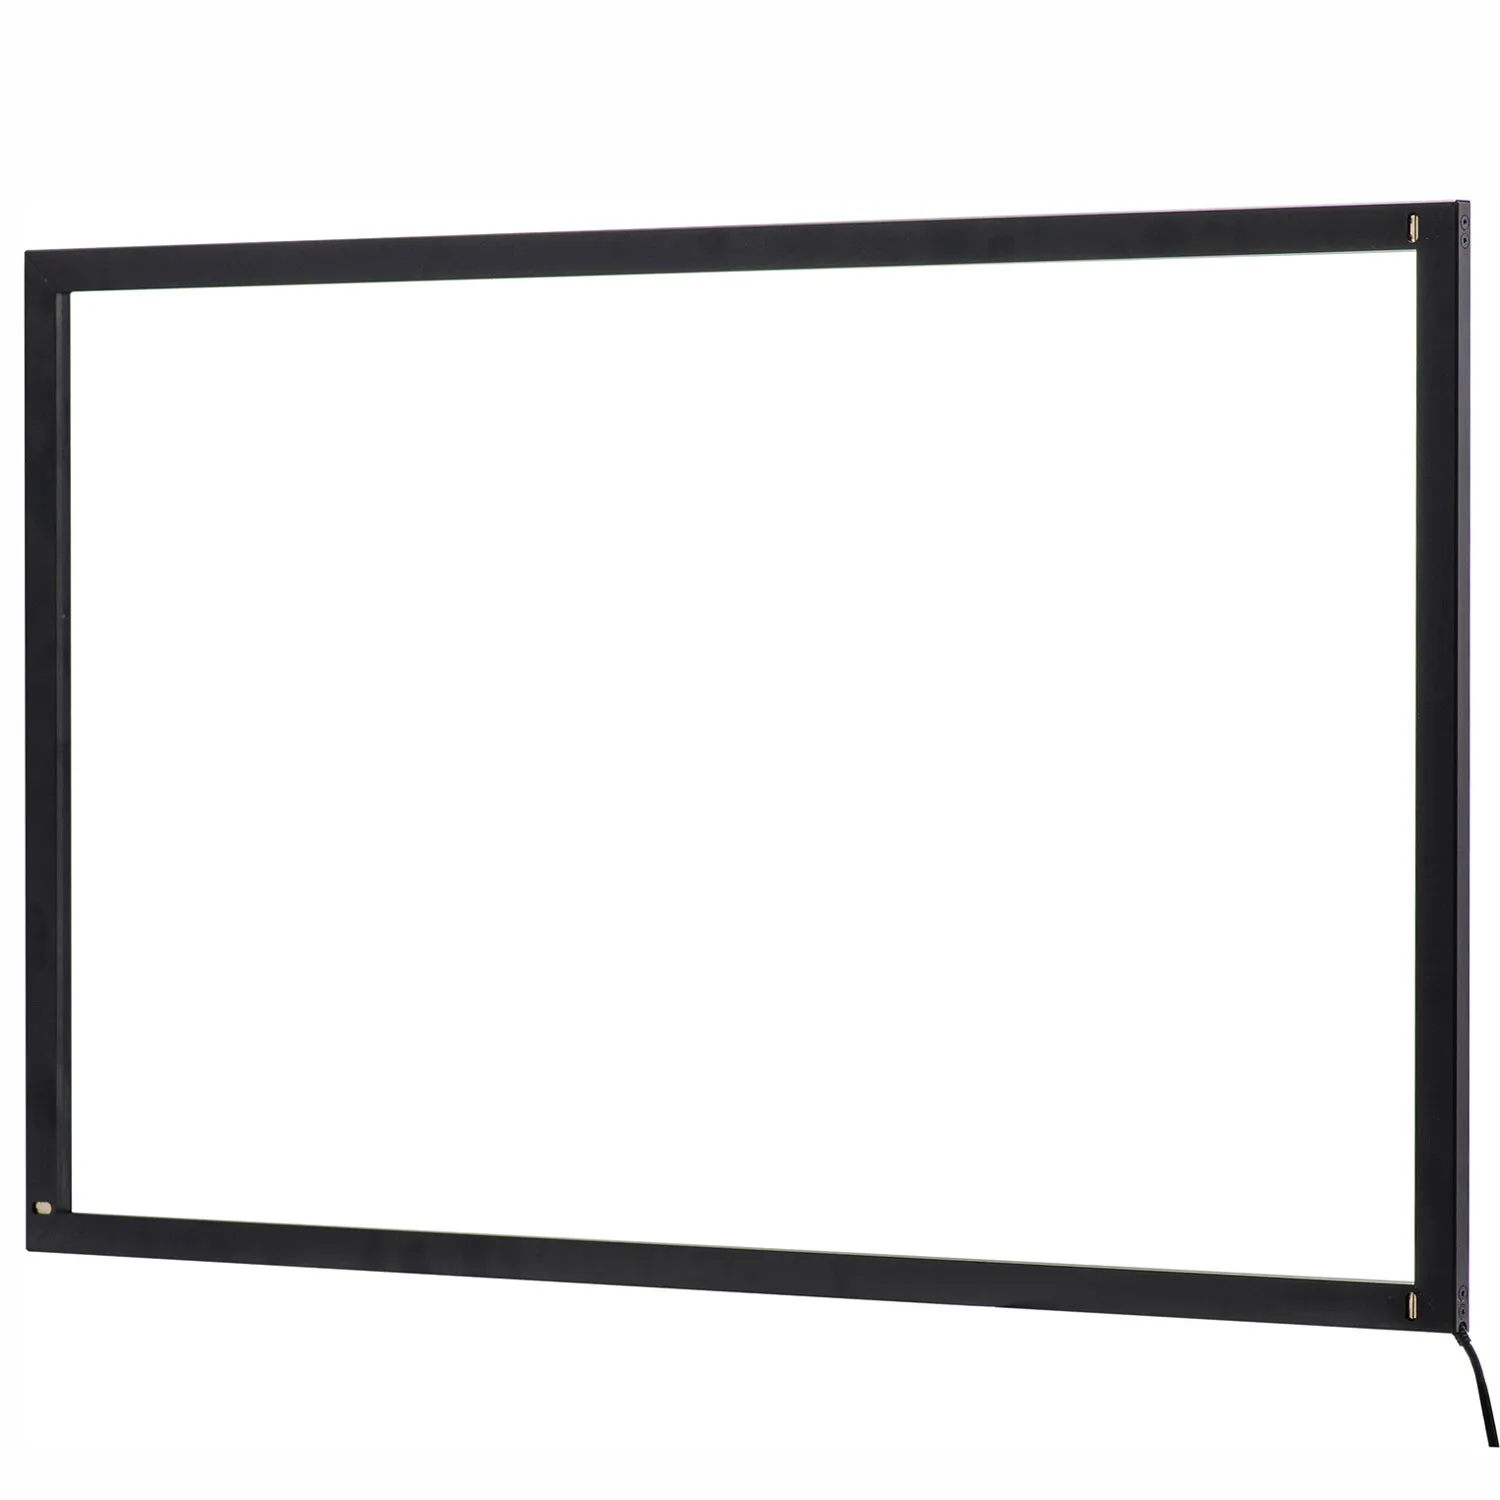 Touch frame Keetouch GmbH 75" KP-750-IP2S0U1